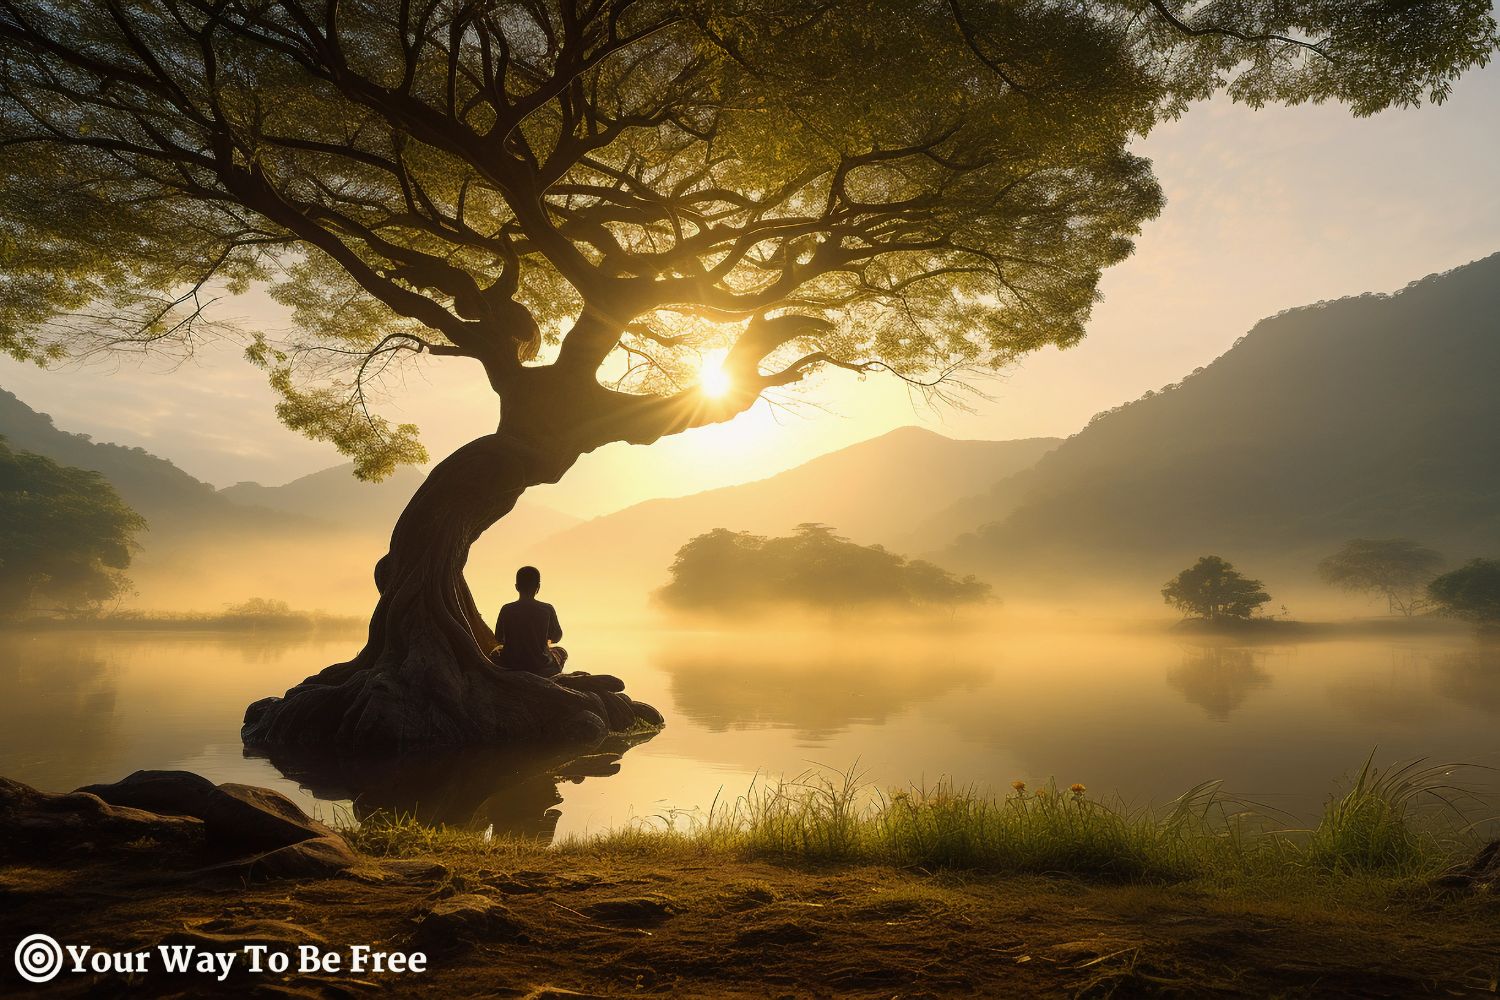 Serene landscape at sunrise, a meditator sitting cross - legged under a sprawling bodhi tree, dappled sunlight, tranquil pond nearby, dew glistening on the grass, misty mountains backdrop developing resilience in times of conflict and change